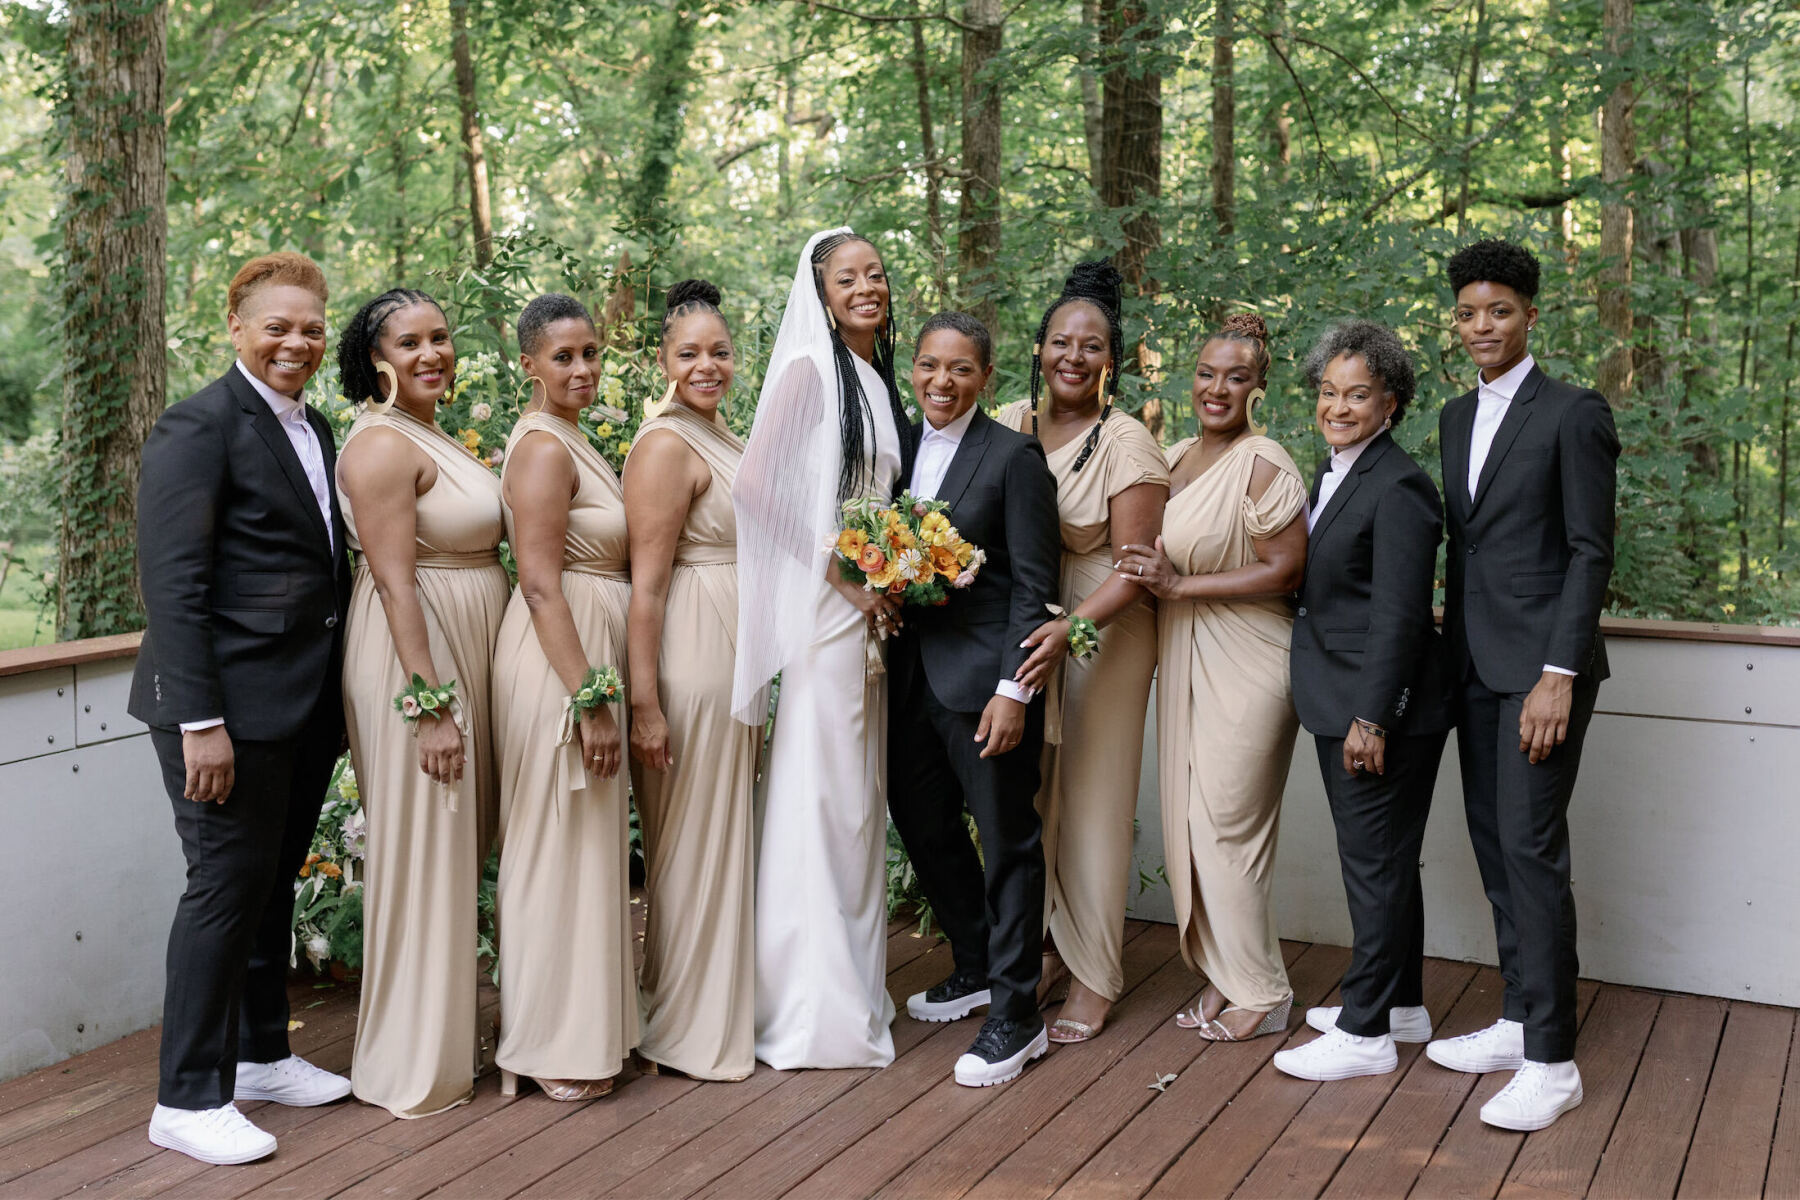 Two brides and their wedding party—in a mix of soft gold dresses and dark grey suits—are all smiles during a group portrait at their authentic modern wedding.